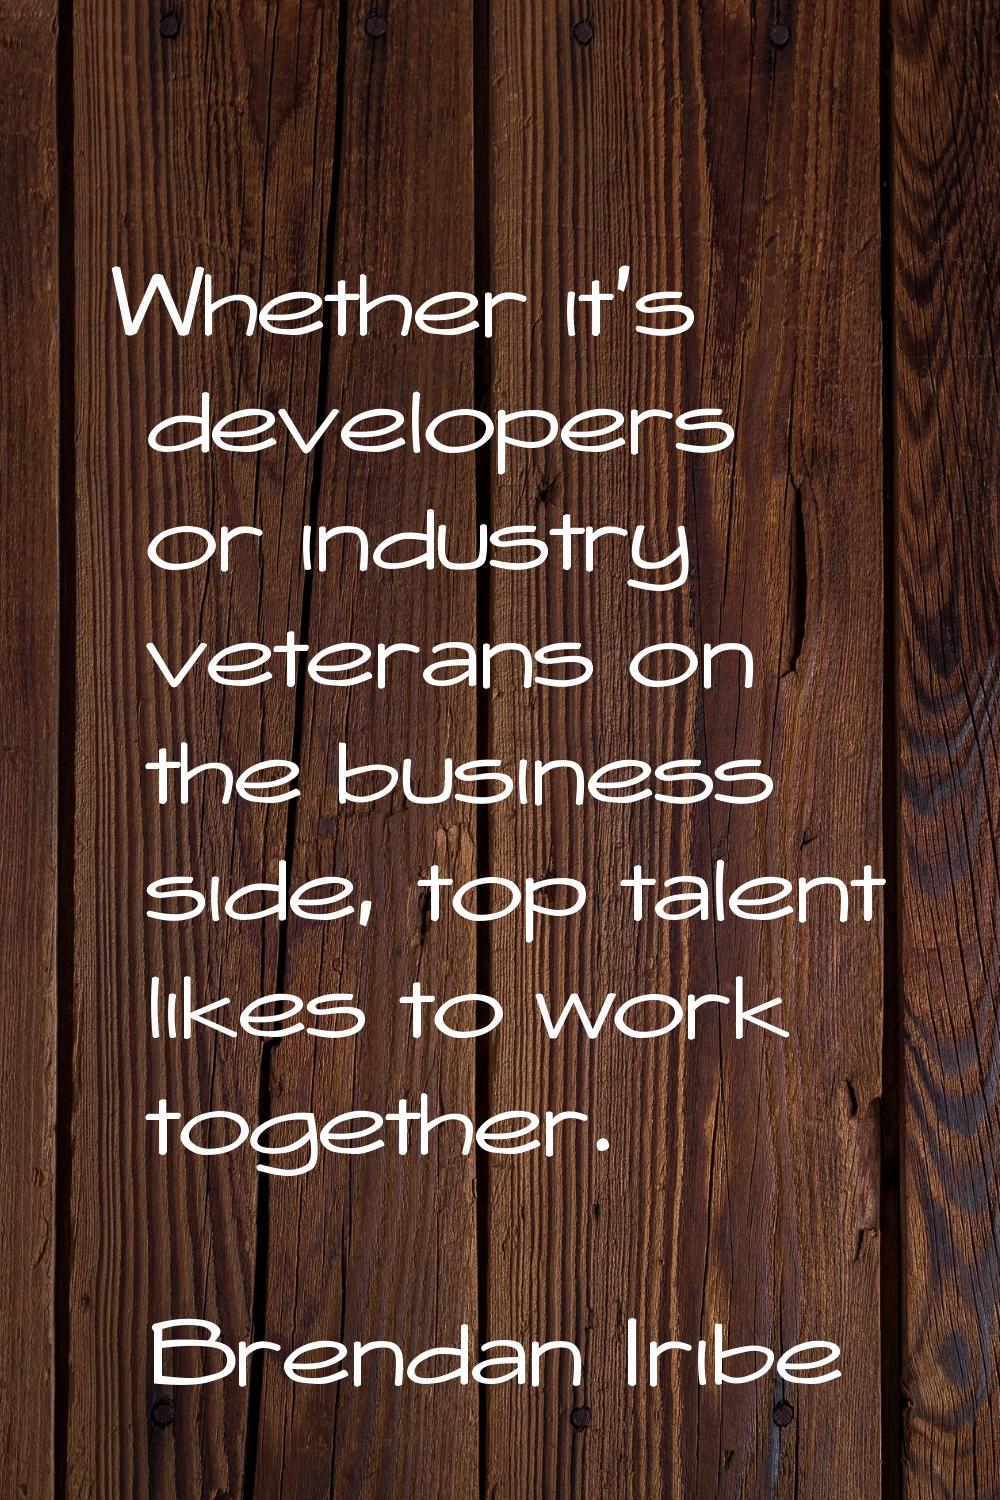 Whether it's developers or industry veterans on the business side, top talent likes to work togethe